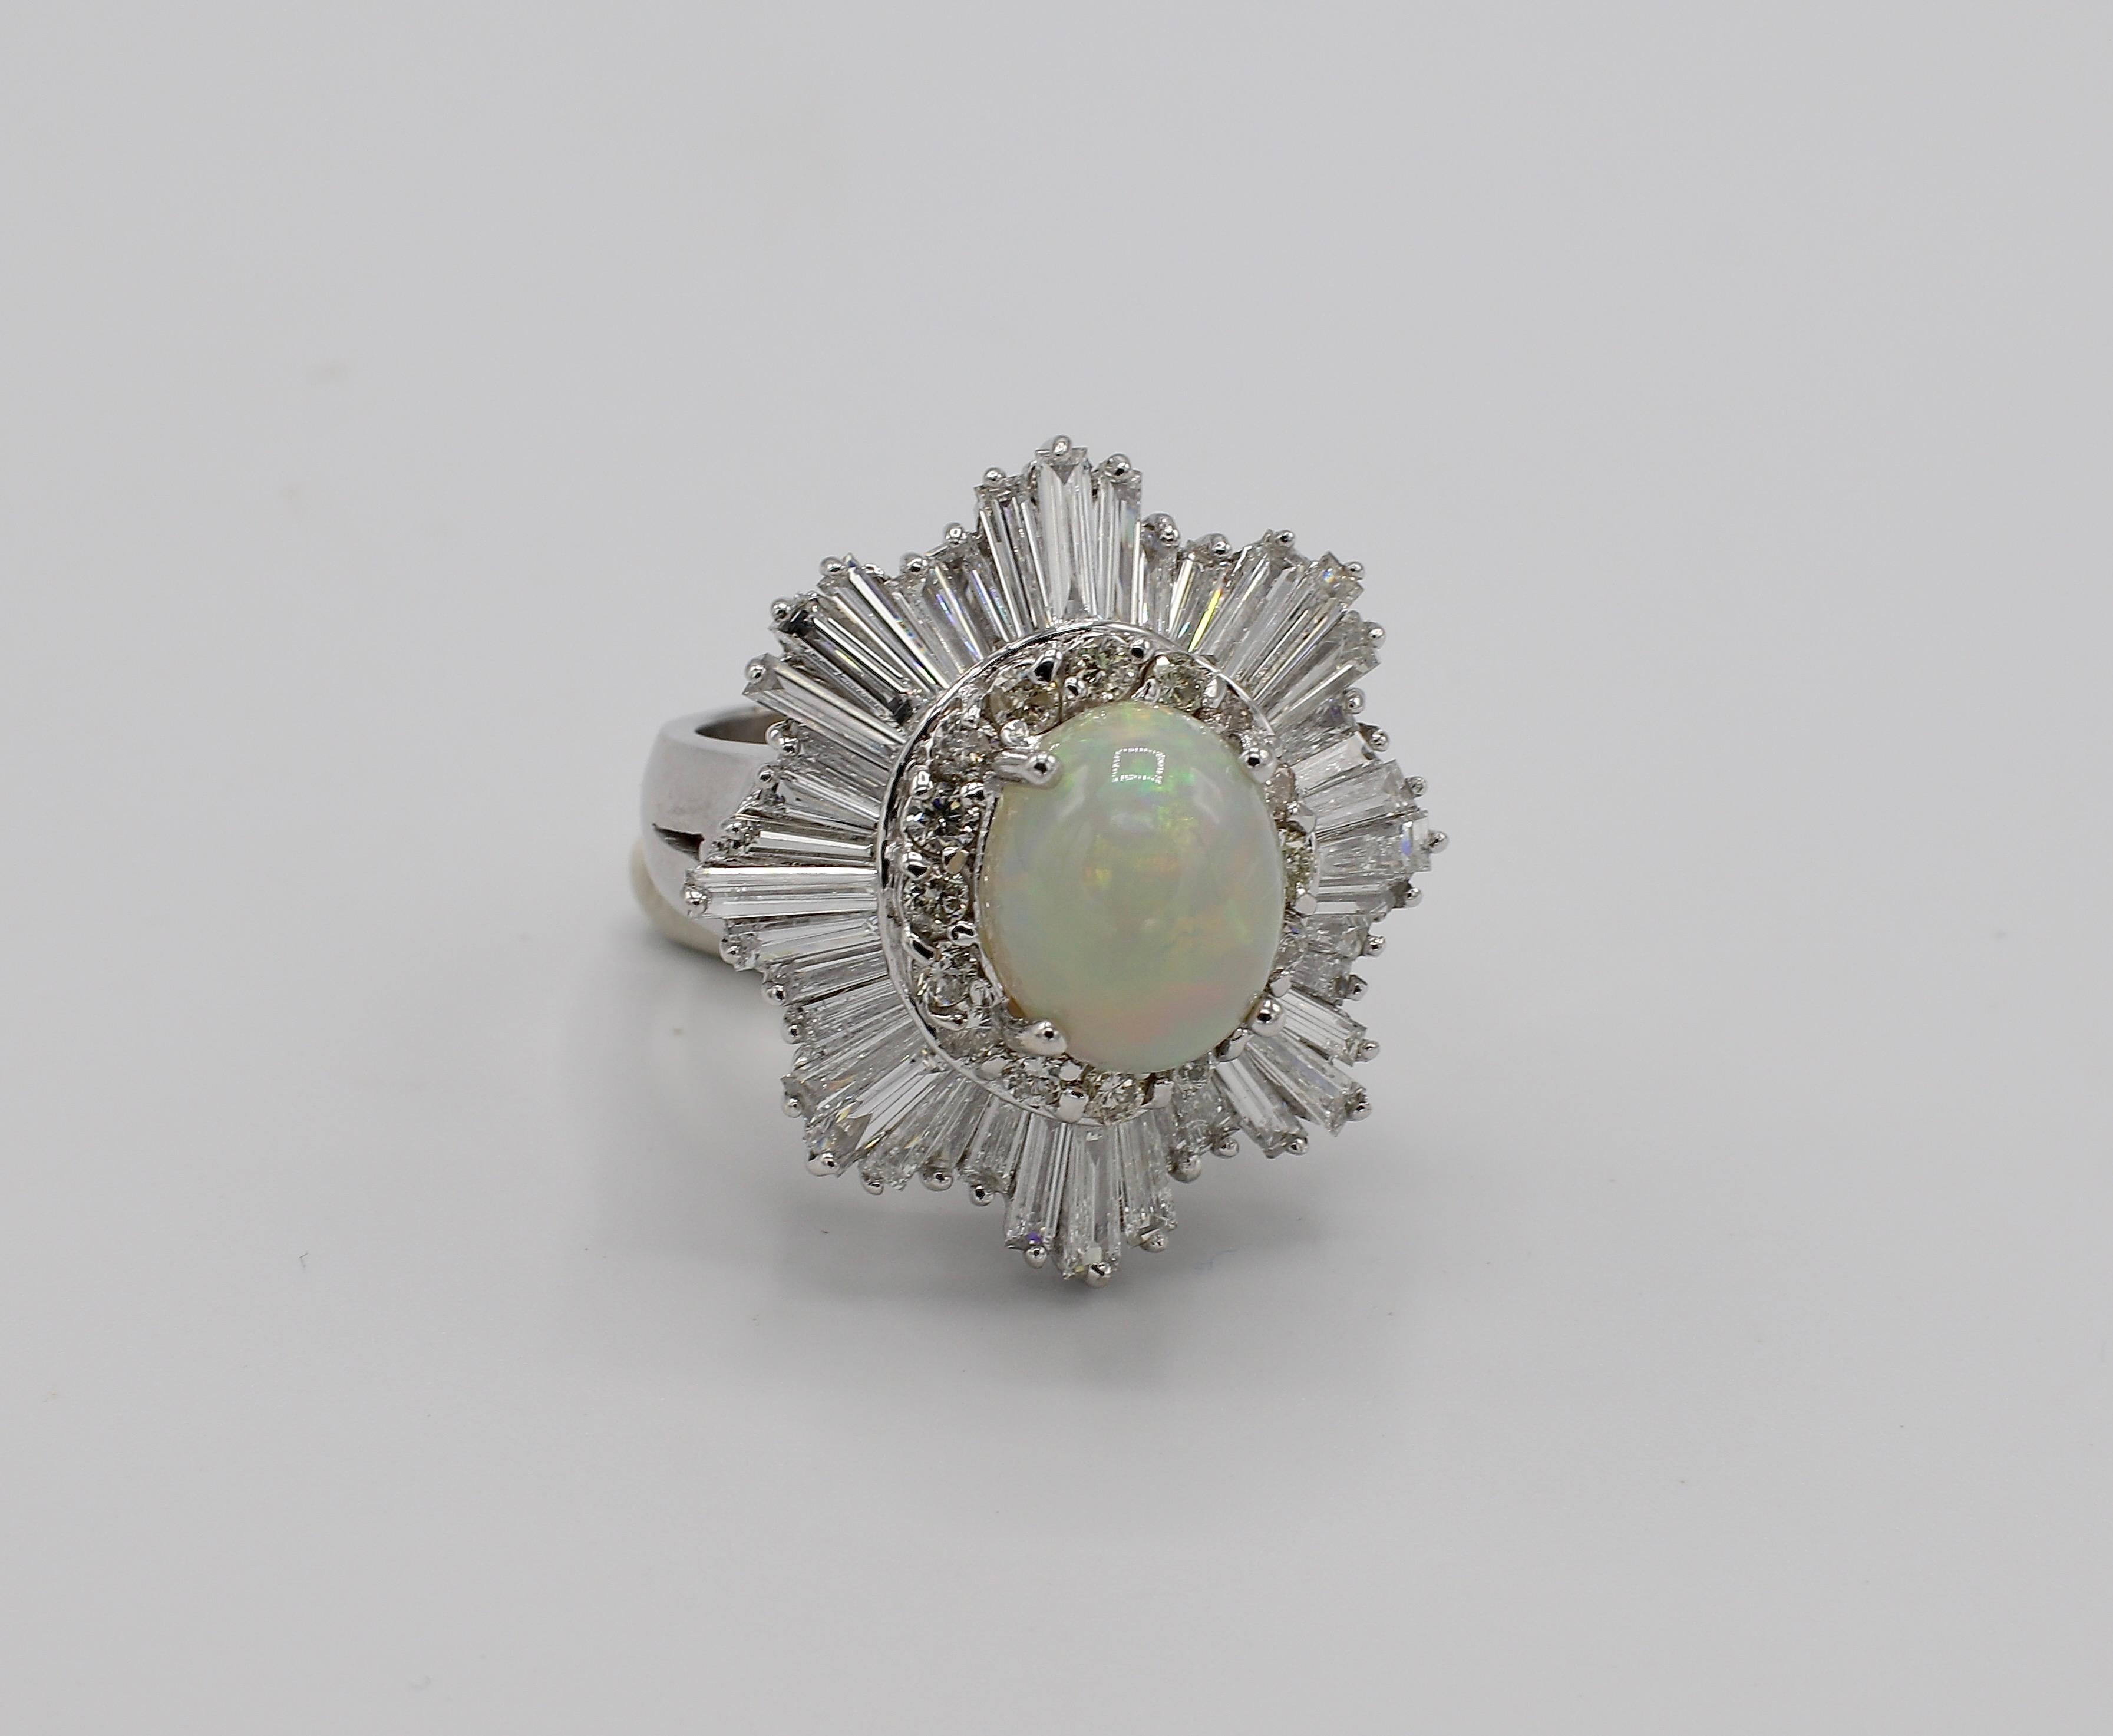 18 Karat White Gold Opal & Diamond Ballerina Cocktail Ring Size 6.5
Metal: 18k white gold
Weight: 17.2 grams
Diamonds: Approx. 4.15 CTW F VS-SI1
Opal: 11.2 x 9.4mm 
Top of ring measures 27 x 25mm
Band is 4.5mm

